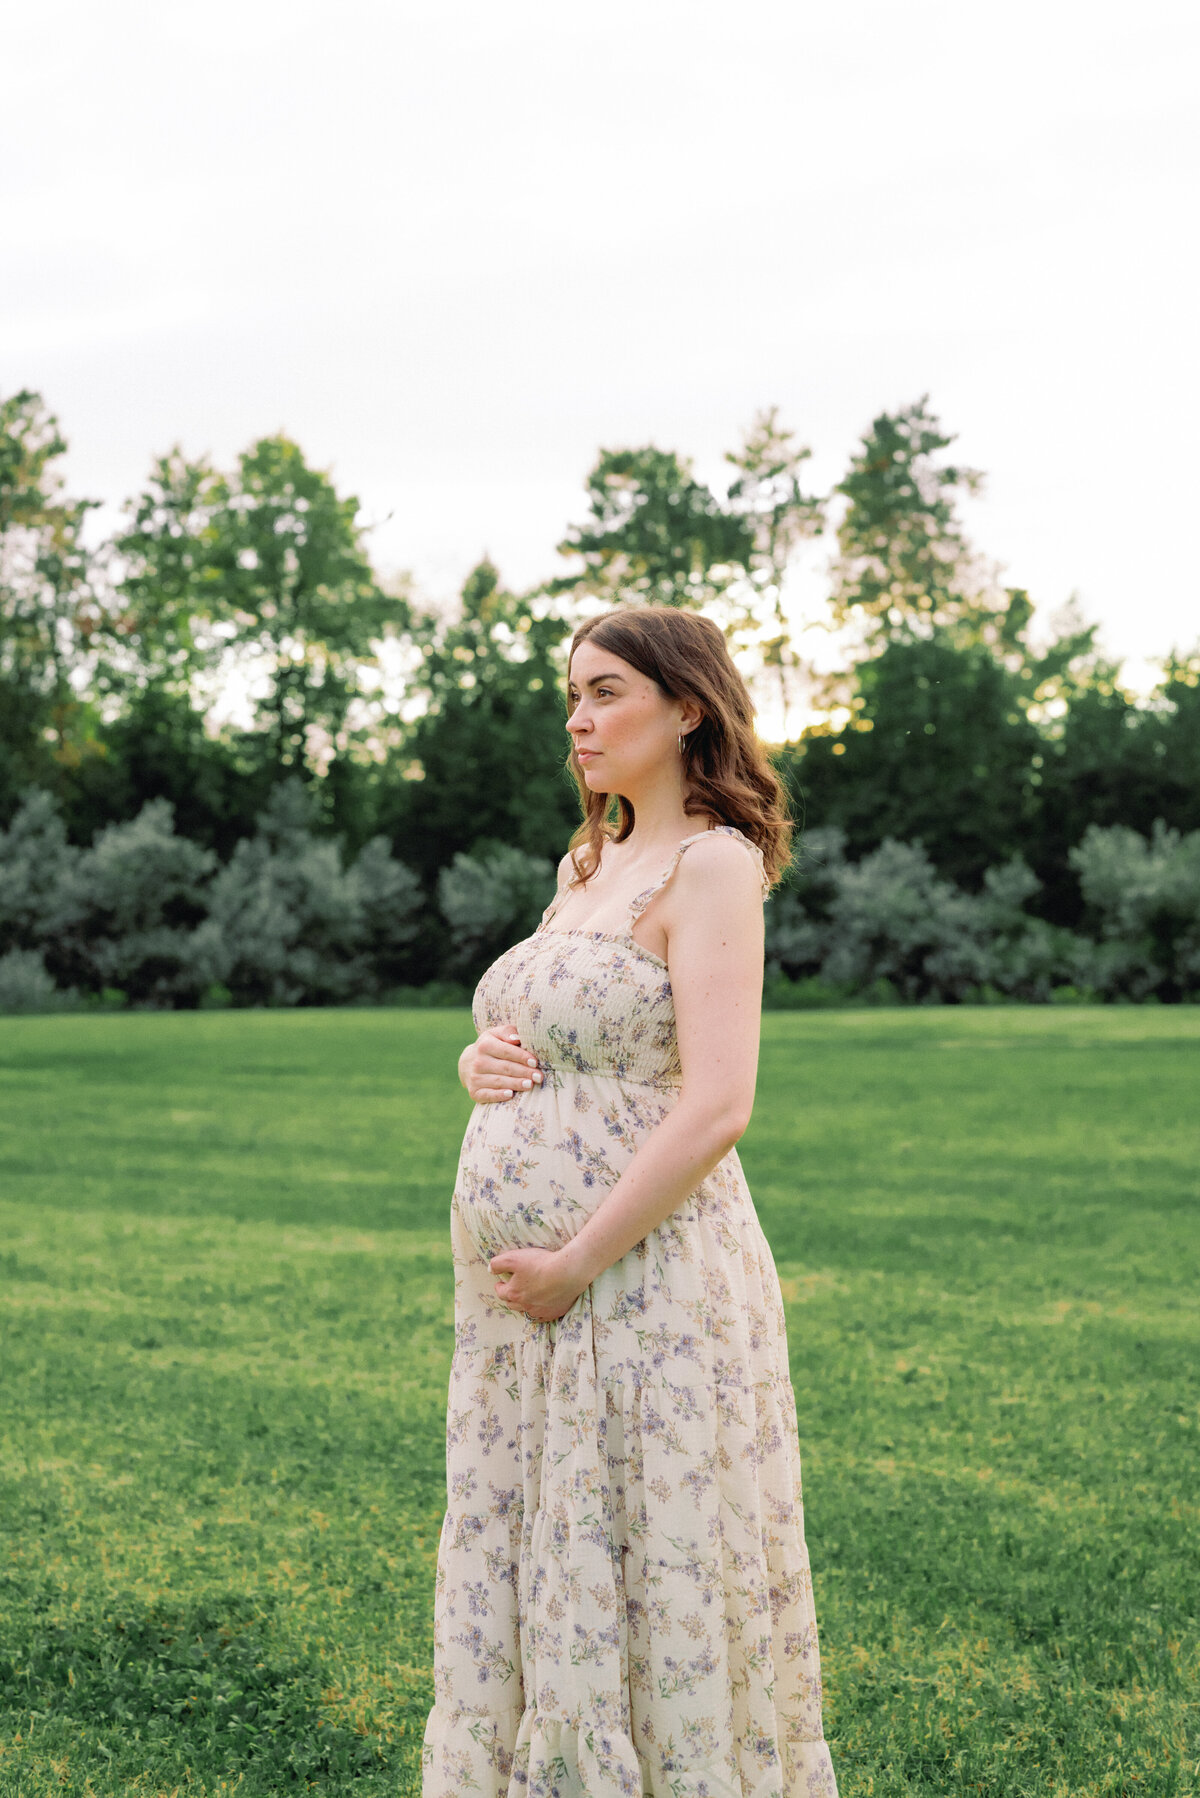 Mother standing in field cradling baby bump in floral dress